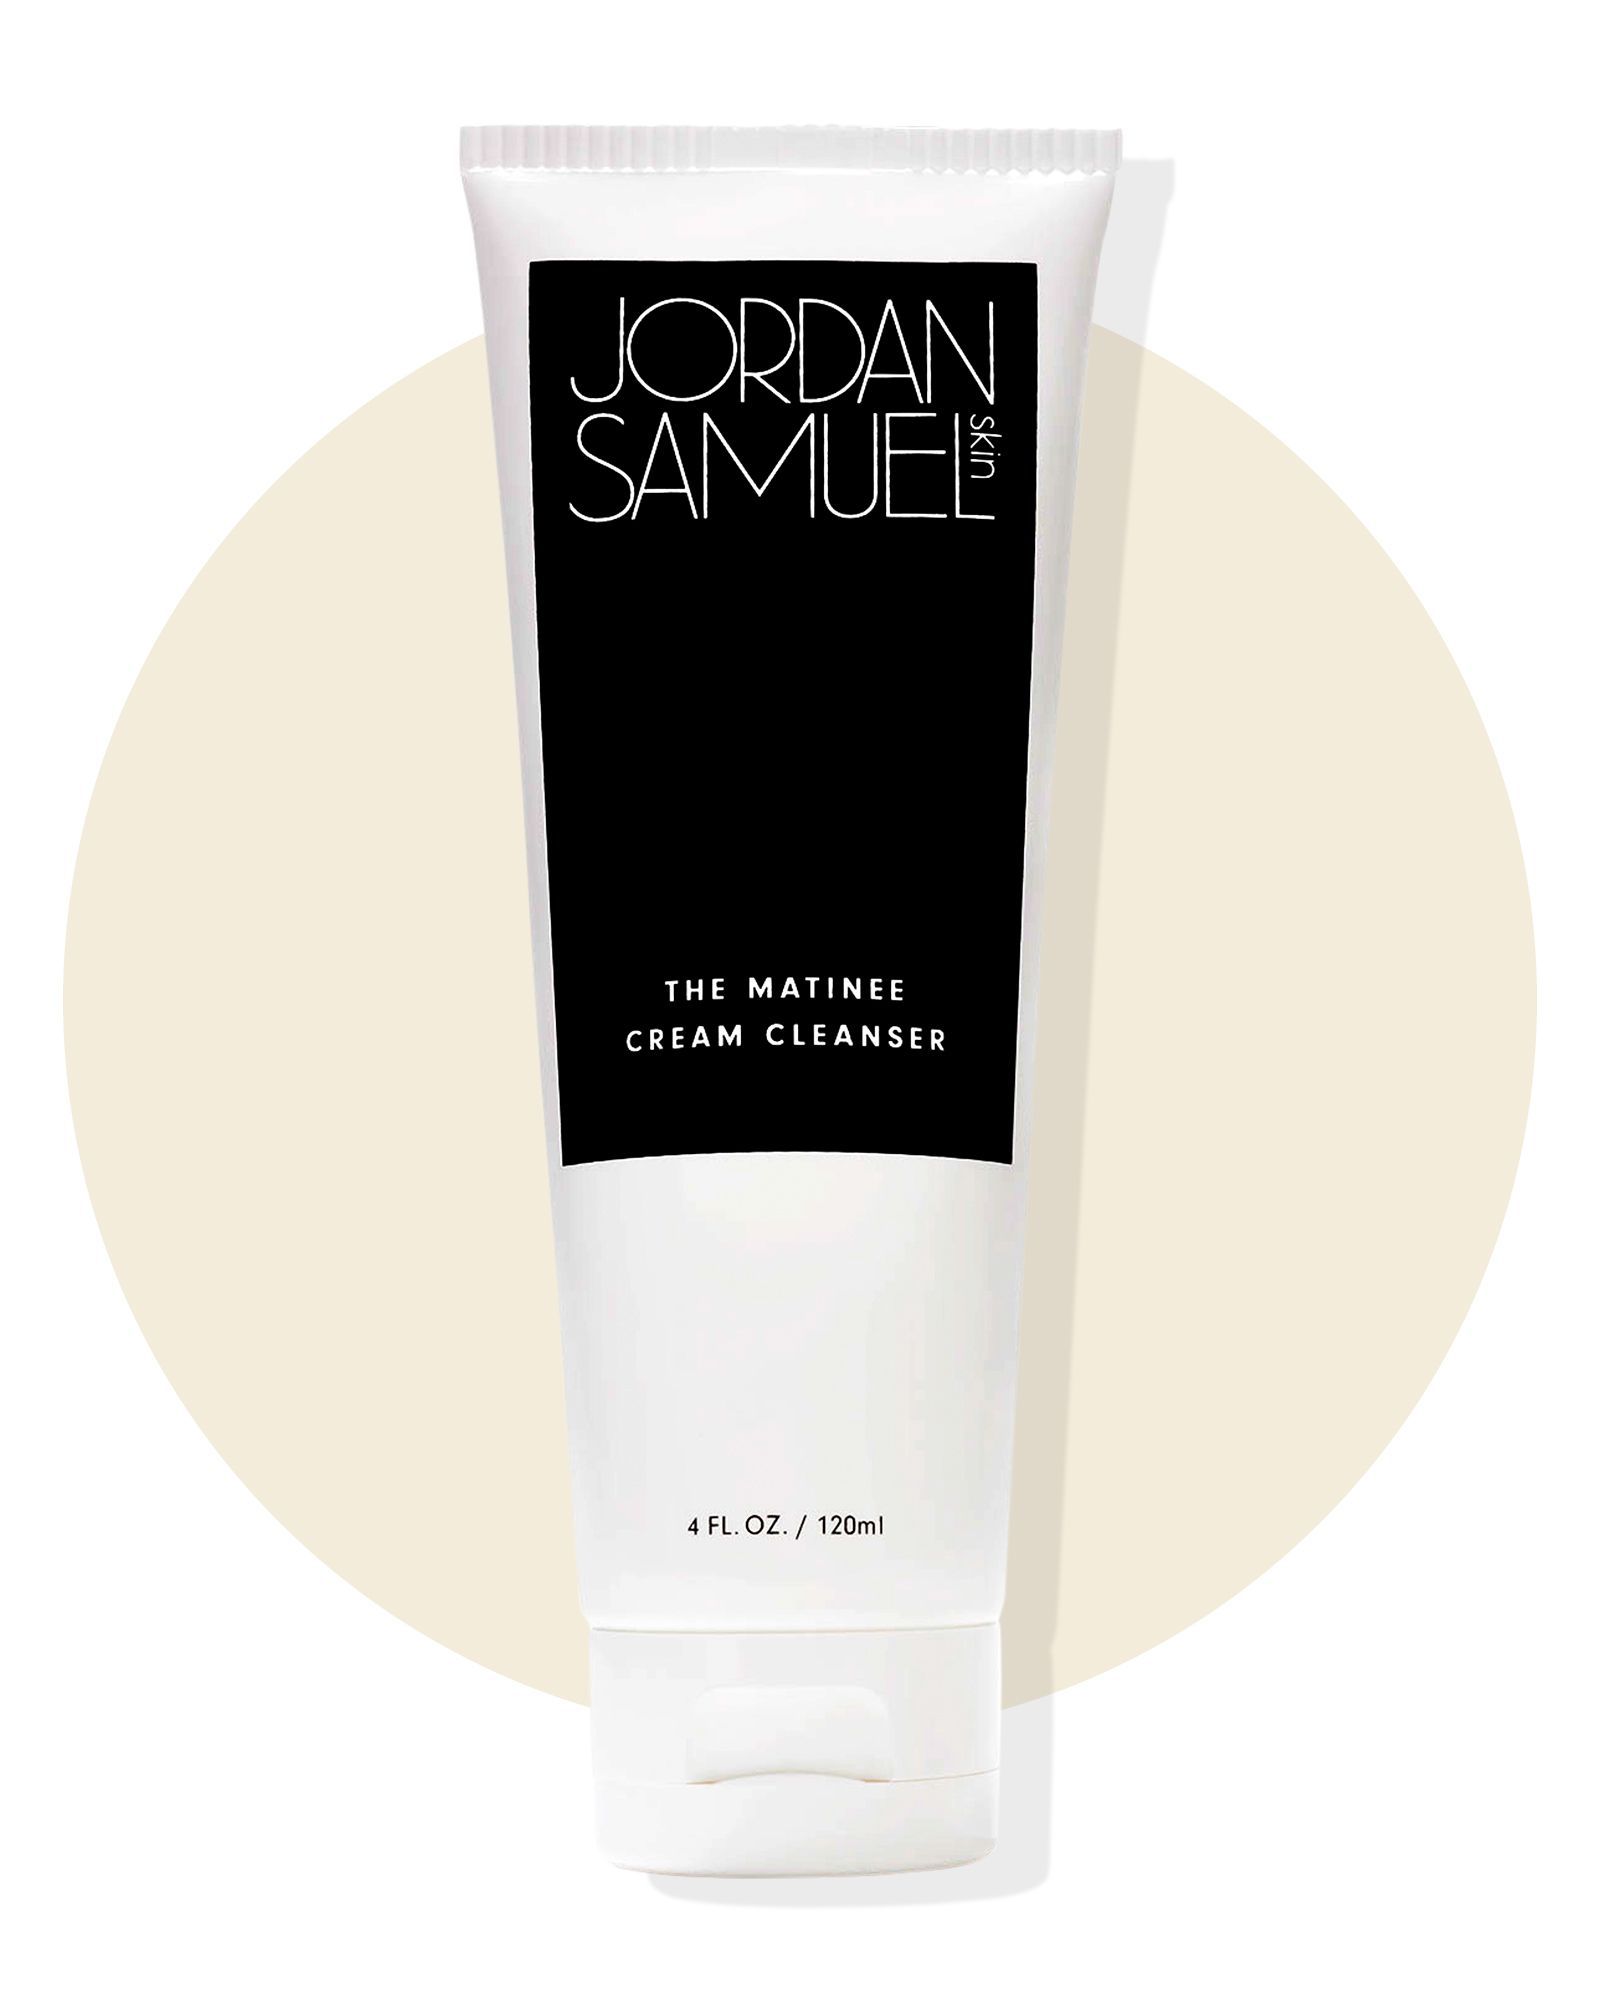 The Matinee Cream Cleanser